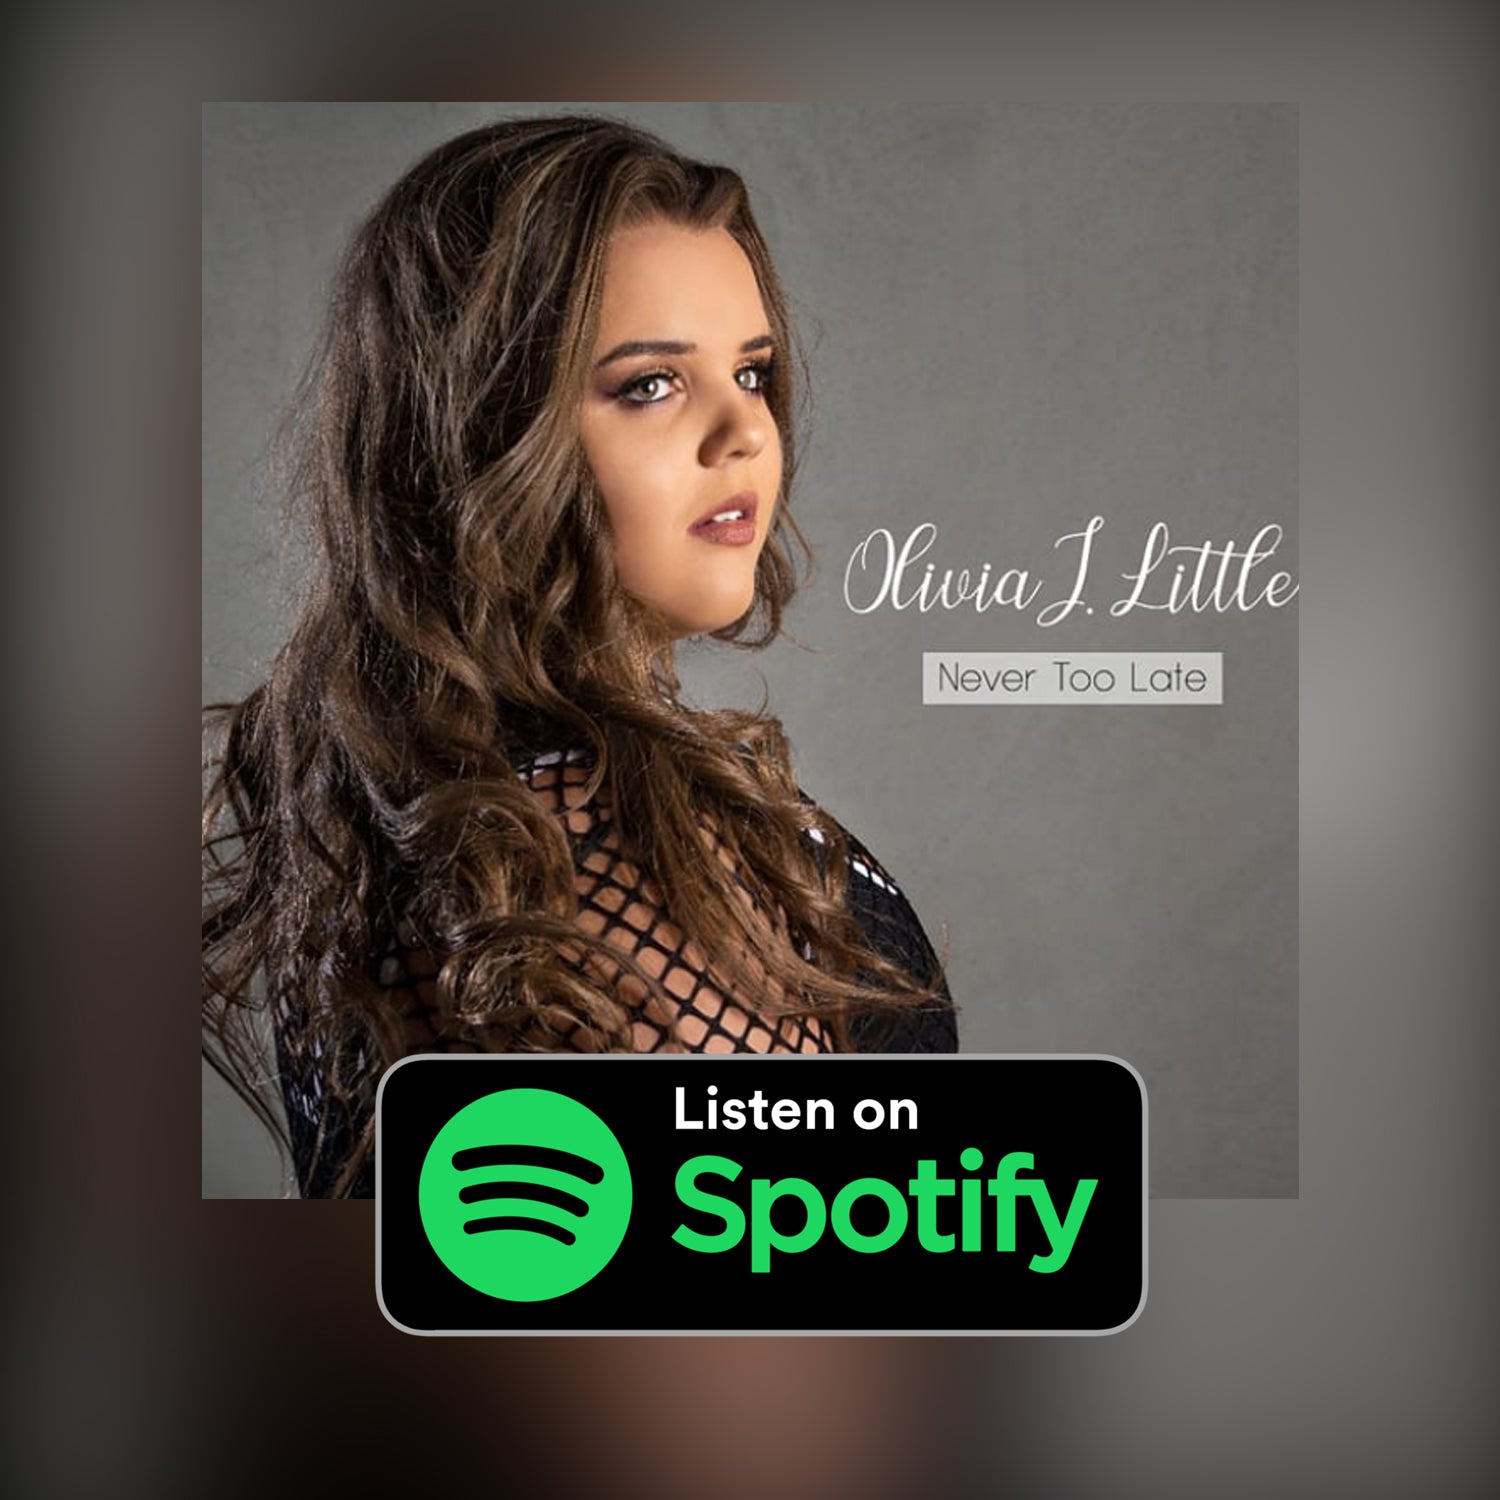 Olivia Joan's songs are now available to hear on Spotify